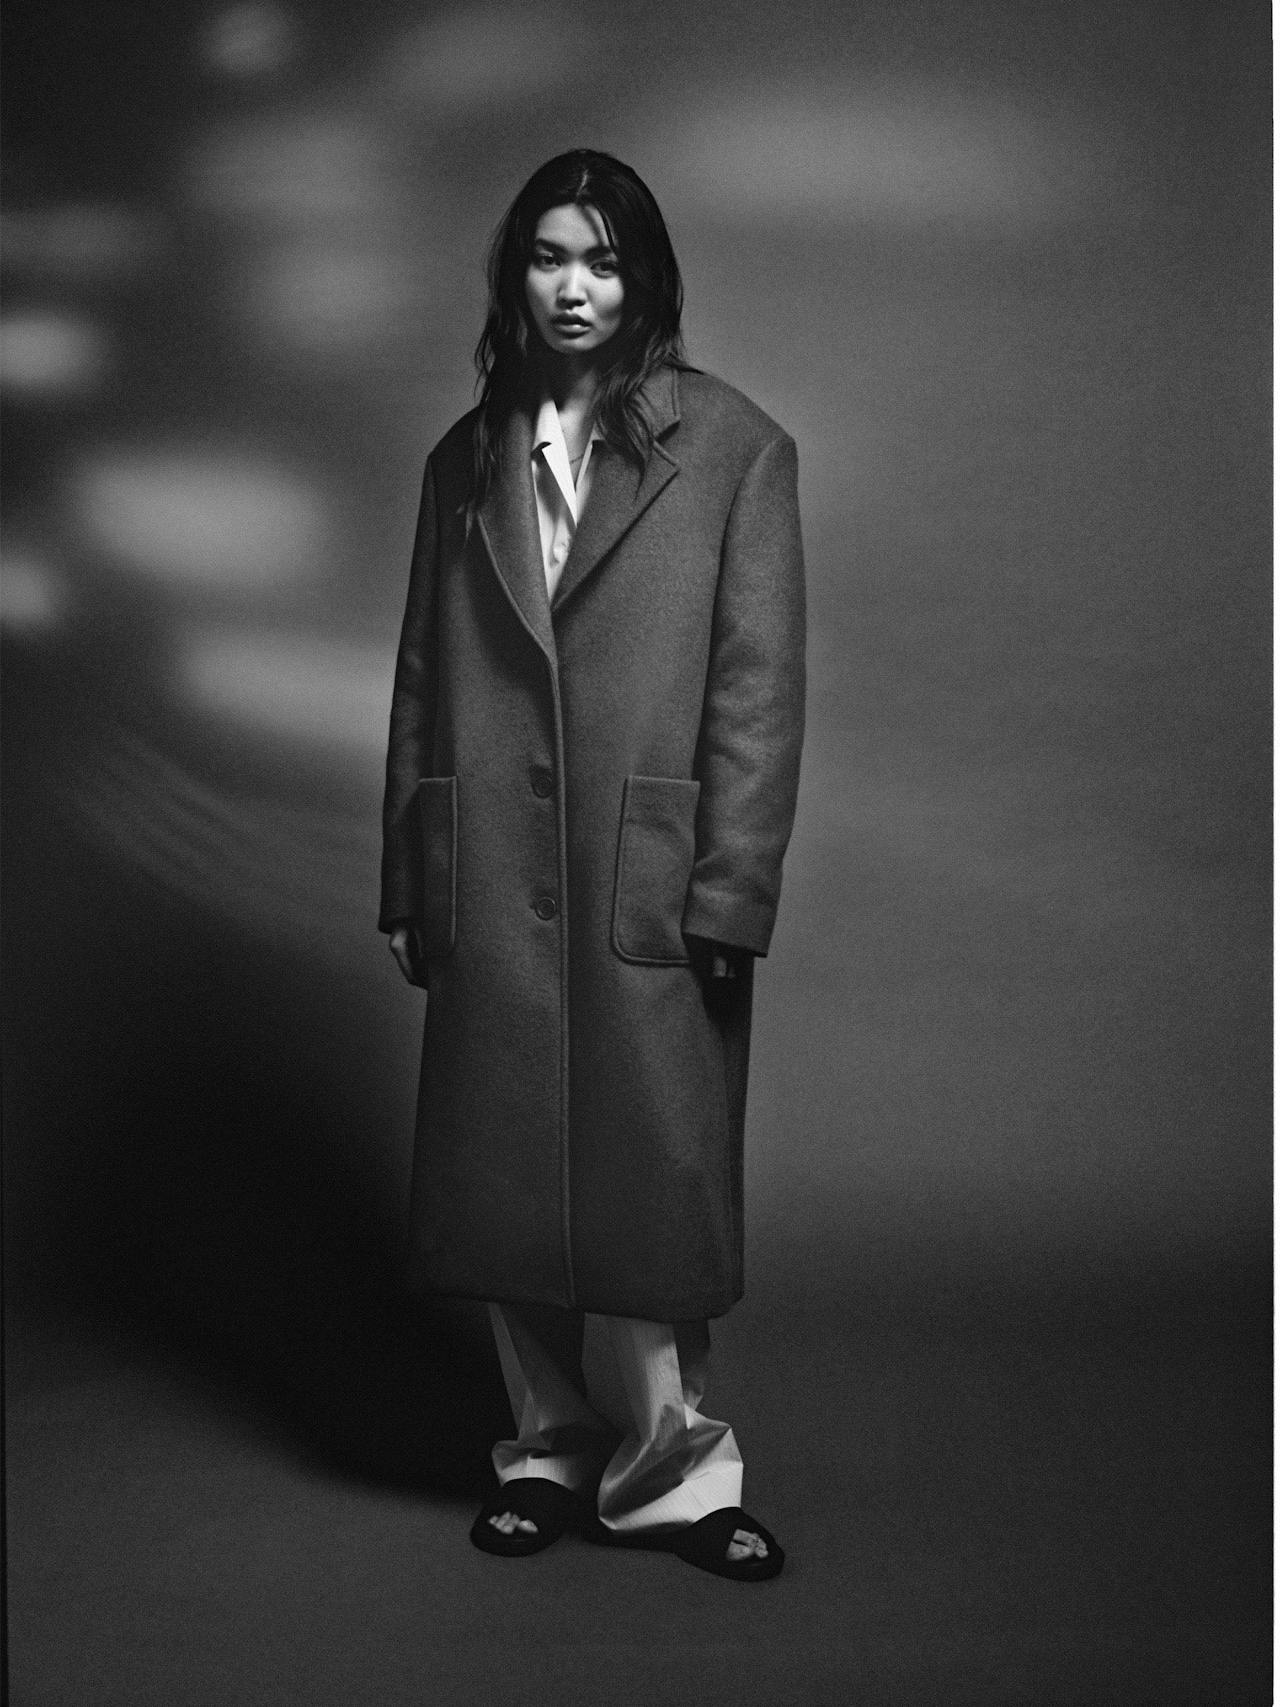 The Grandpa brown coat by Issue Twelve is single breasted with an oversized fit. The double-faced cashmere is ideal for Autumn Winter.  Collagerie.com